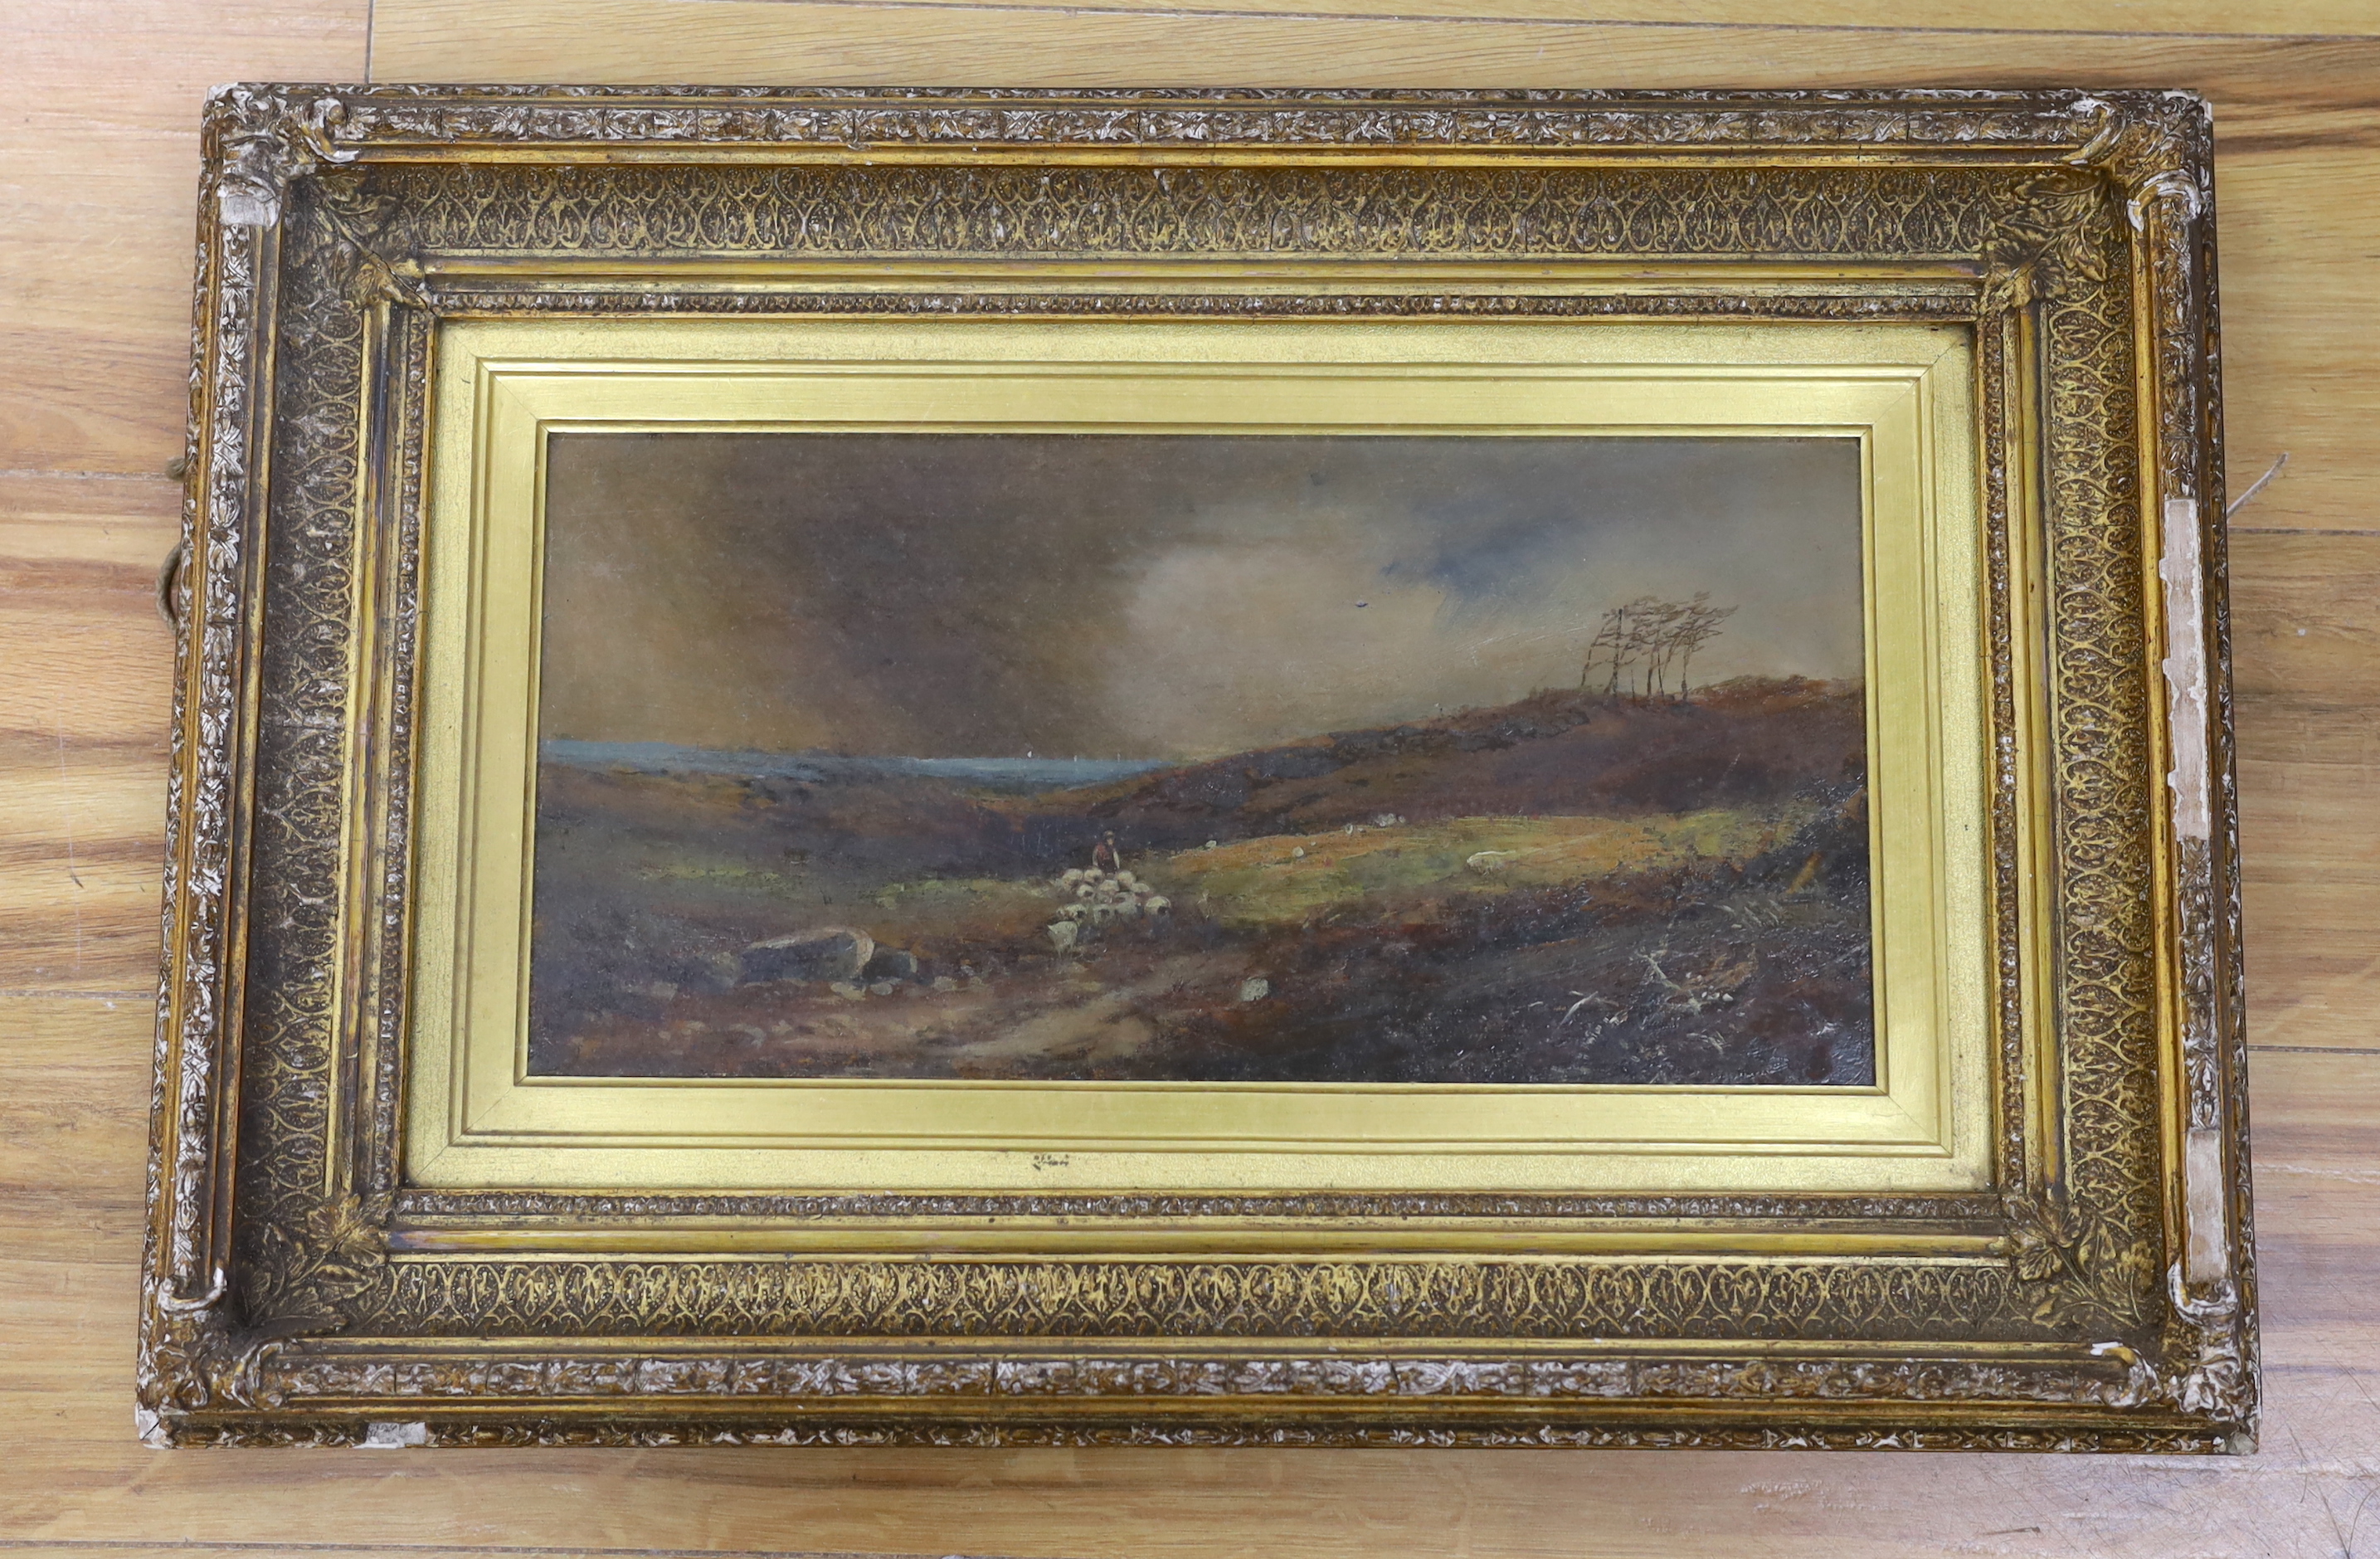 19th century school, oil on canvas, Rural landscape with shepherd and flock of sheep, 39 x 19cm, ornate gilt frame